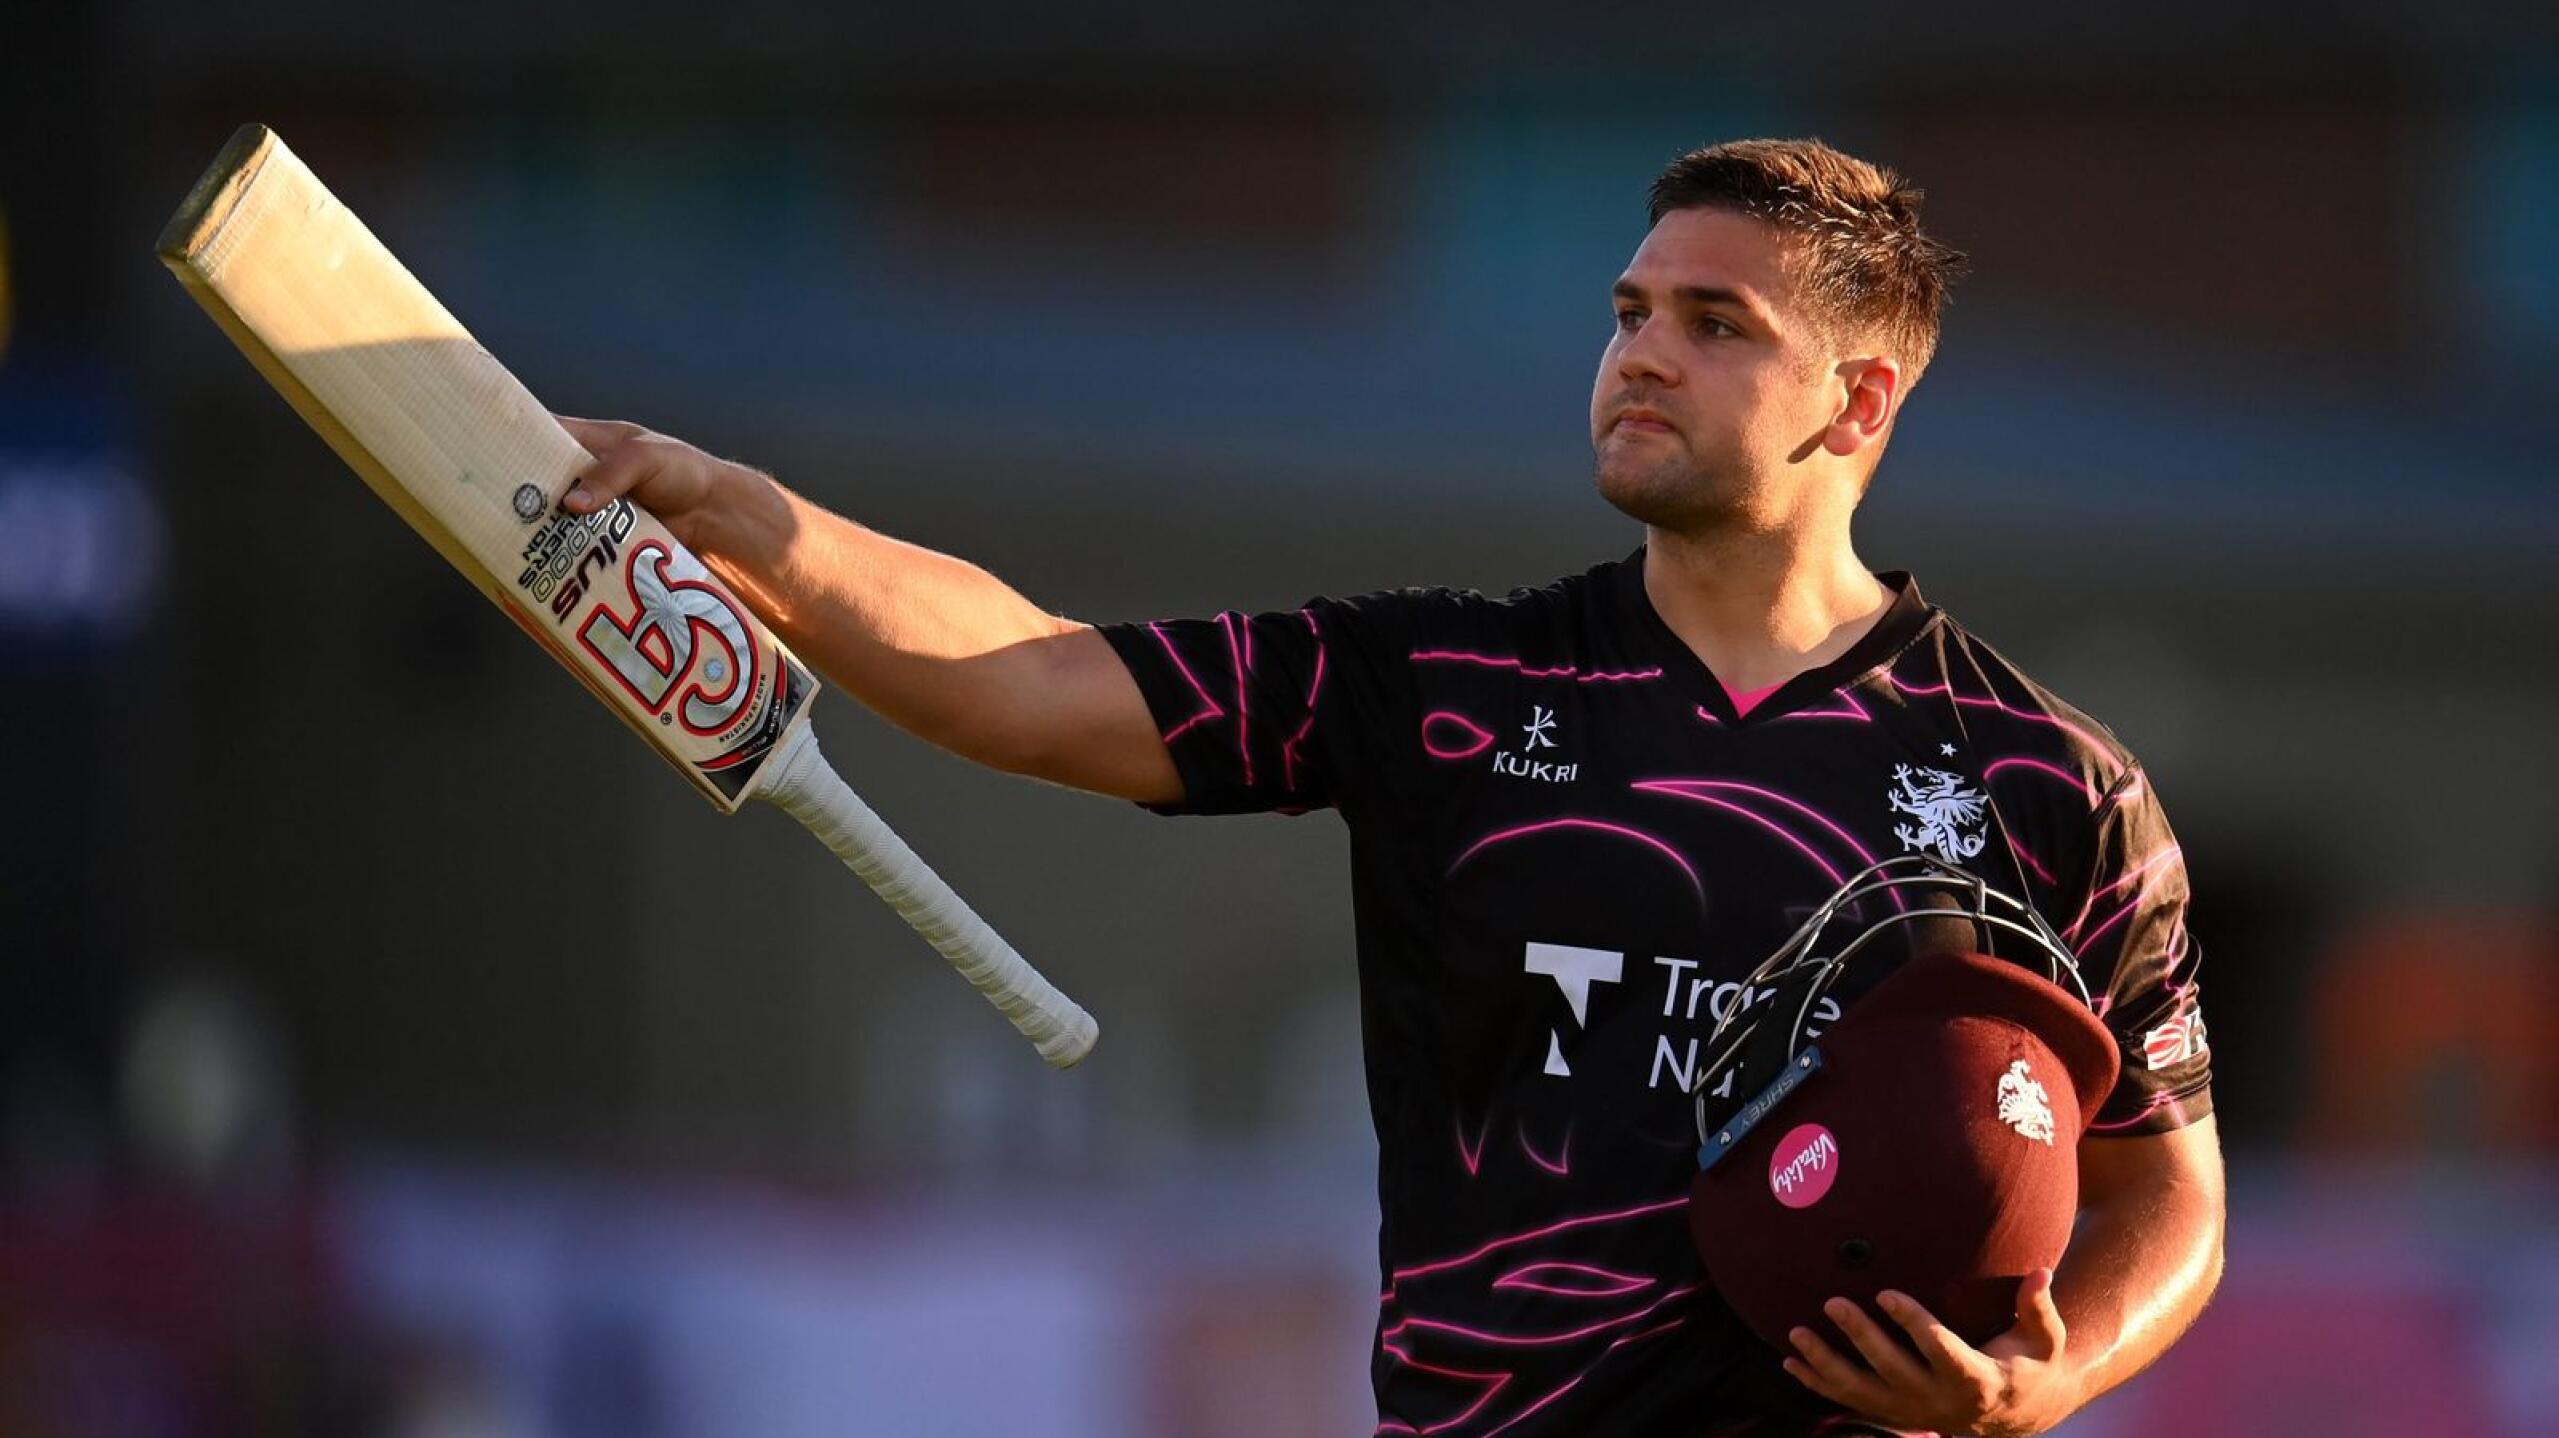 Rilee Rossouw has struck 600 runs at an average of 50 for English county team Somerset in the on-going Vitality Blast